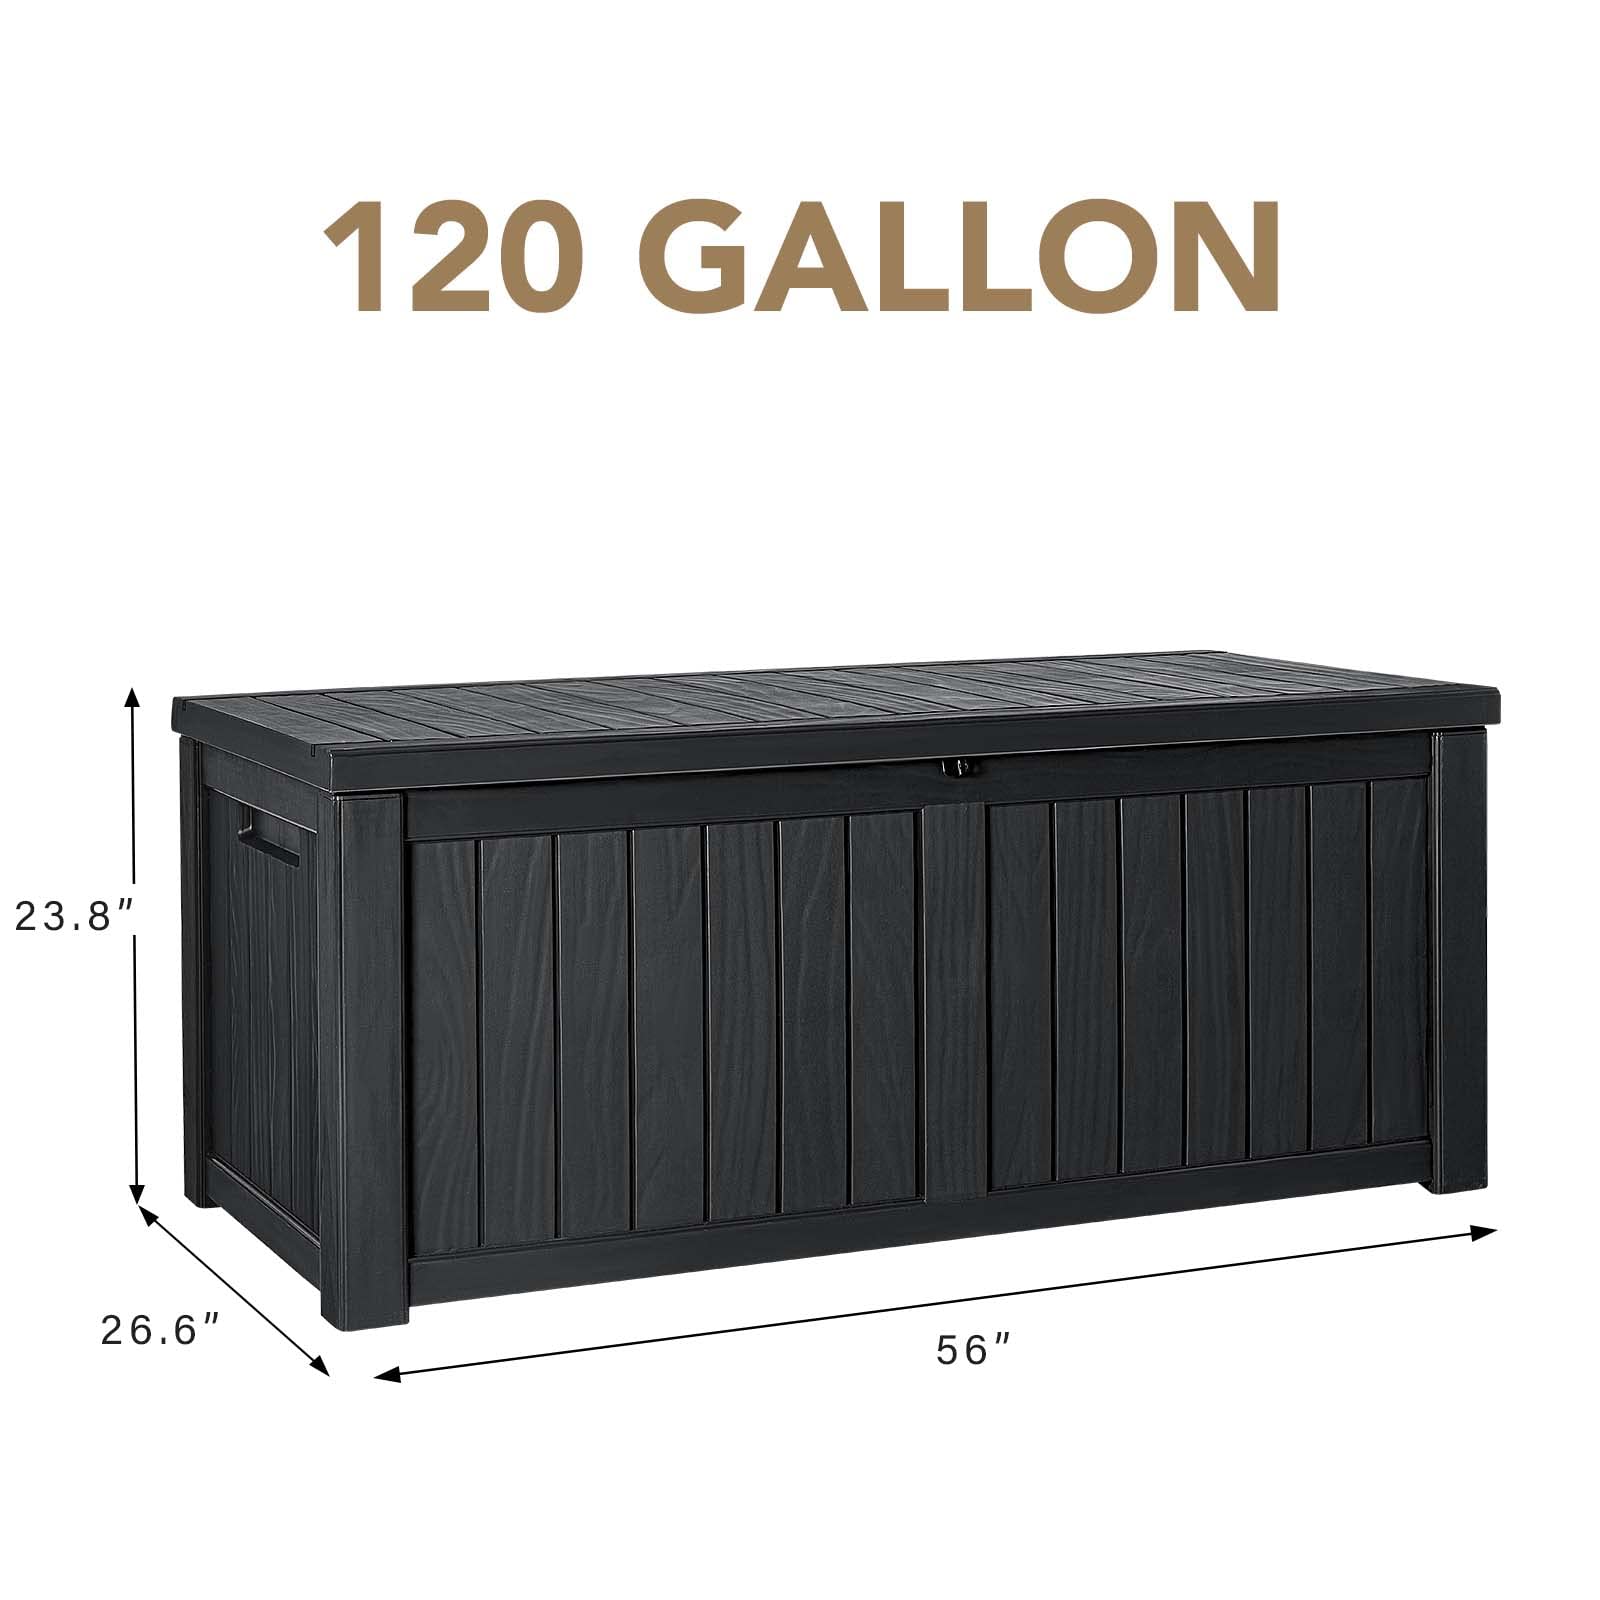 Devoko 120 Gallon Resin Deck Box Waterproof Indoor Outdoor Storage Box Lockable Large Storage Container for Patio Furniture Cushions, Pool Toys and Garden Tools